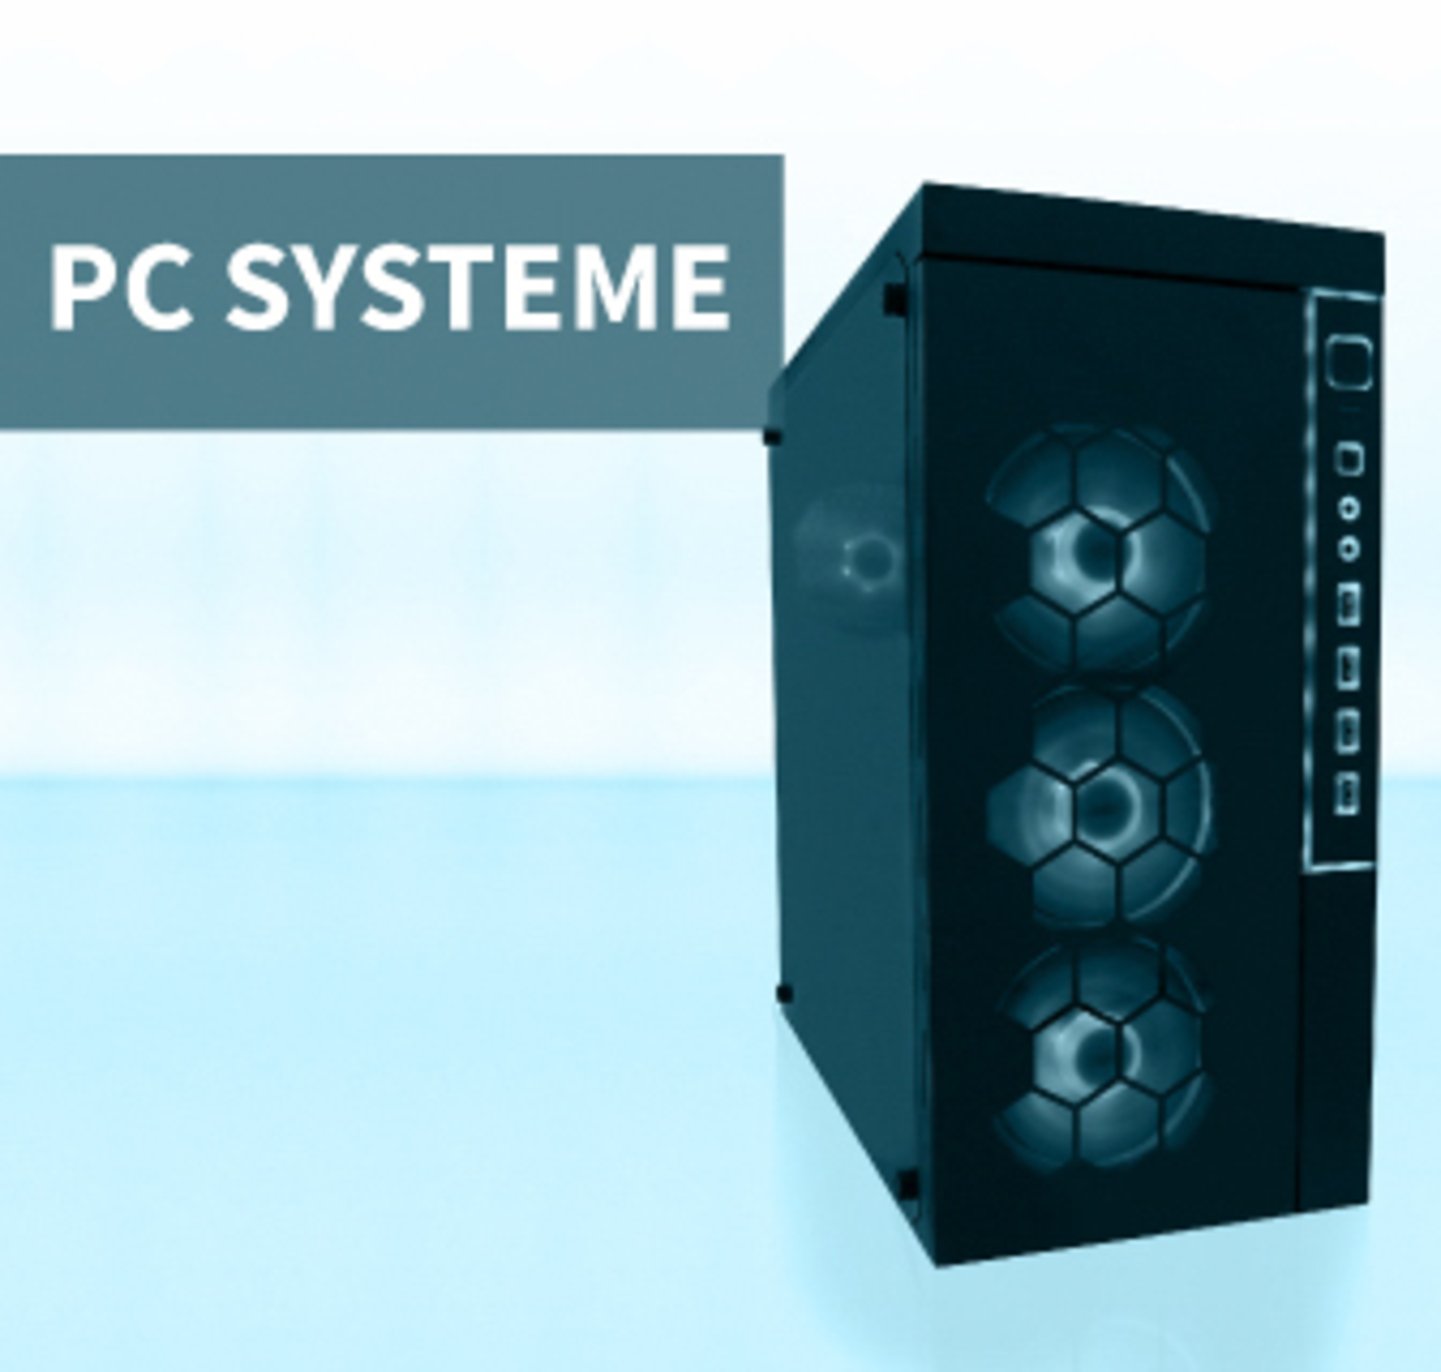 PC Systeme